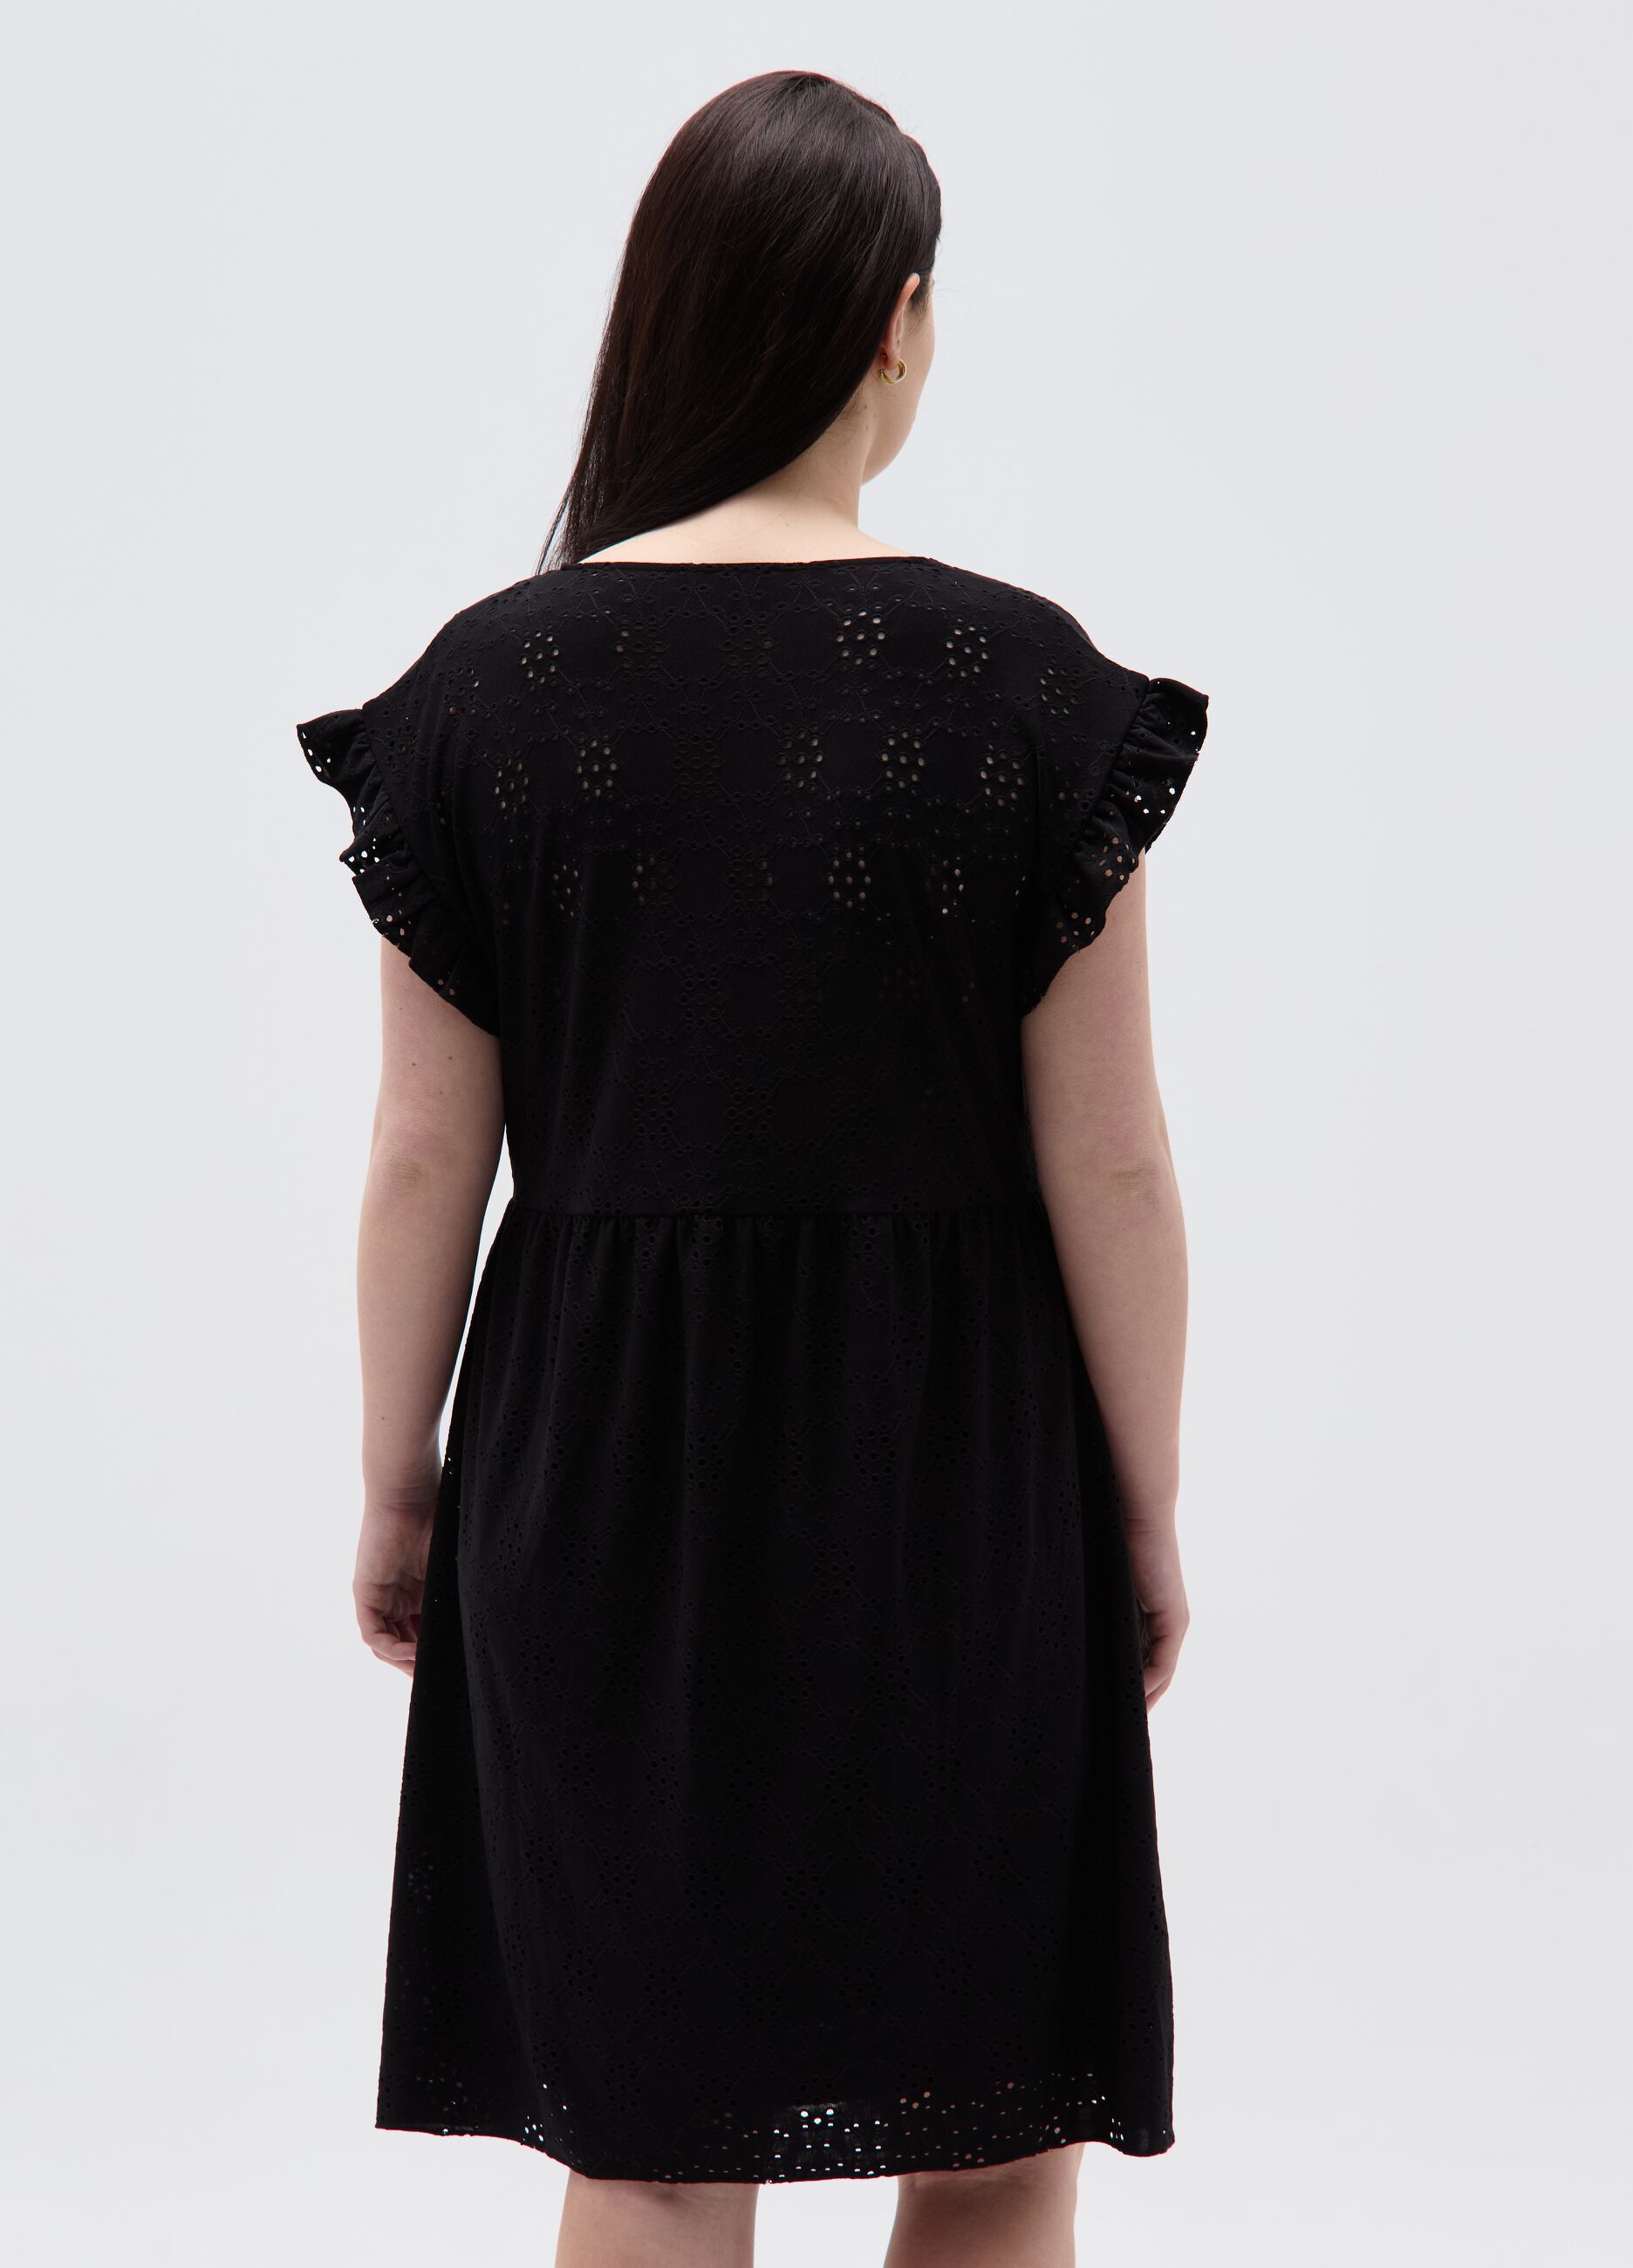 Curvy short dress in broderie anglaise